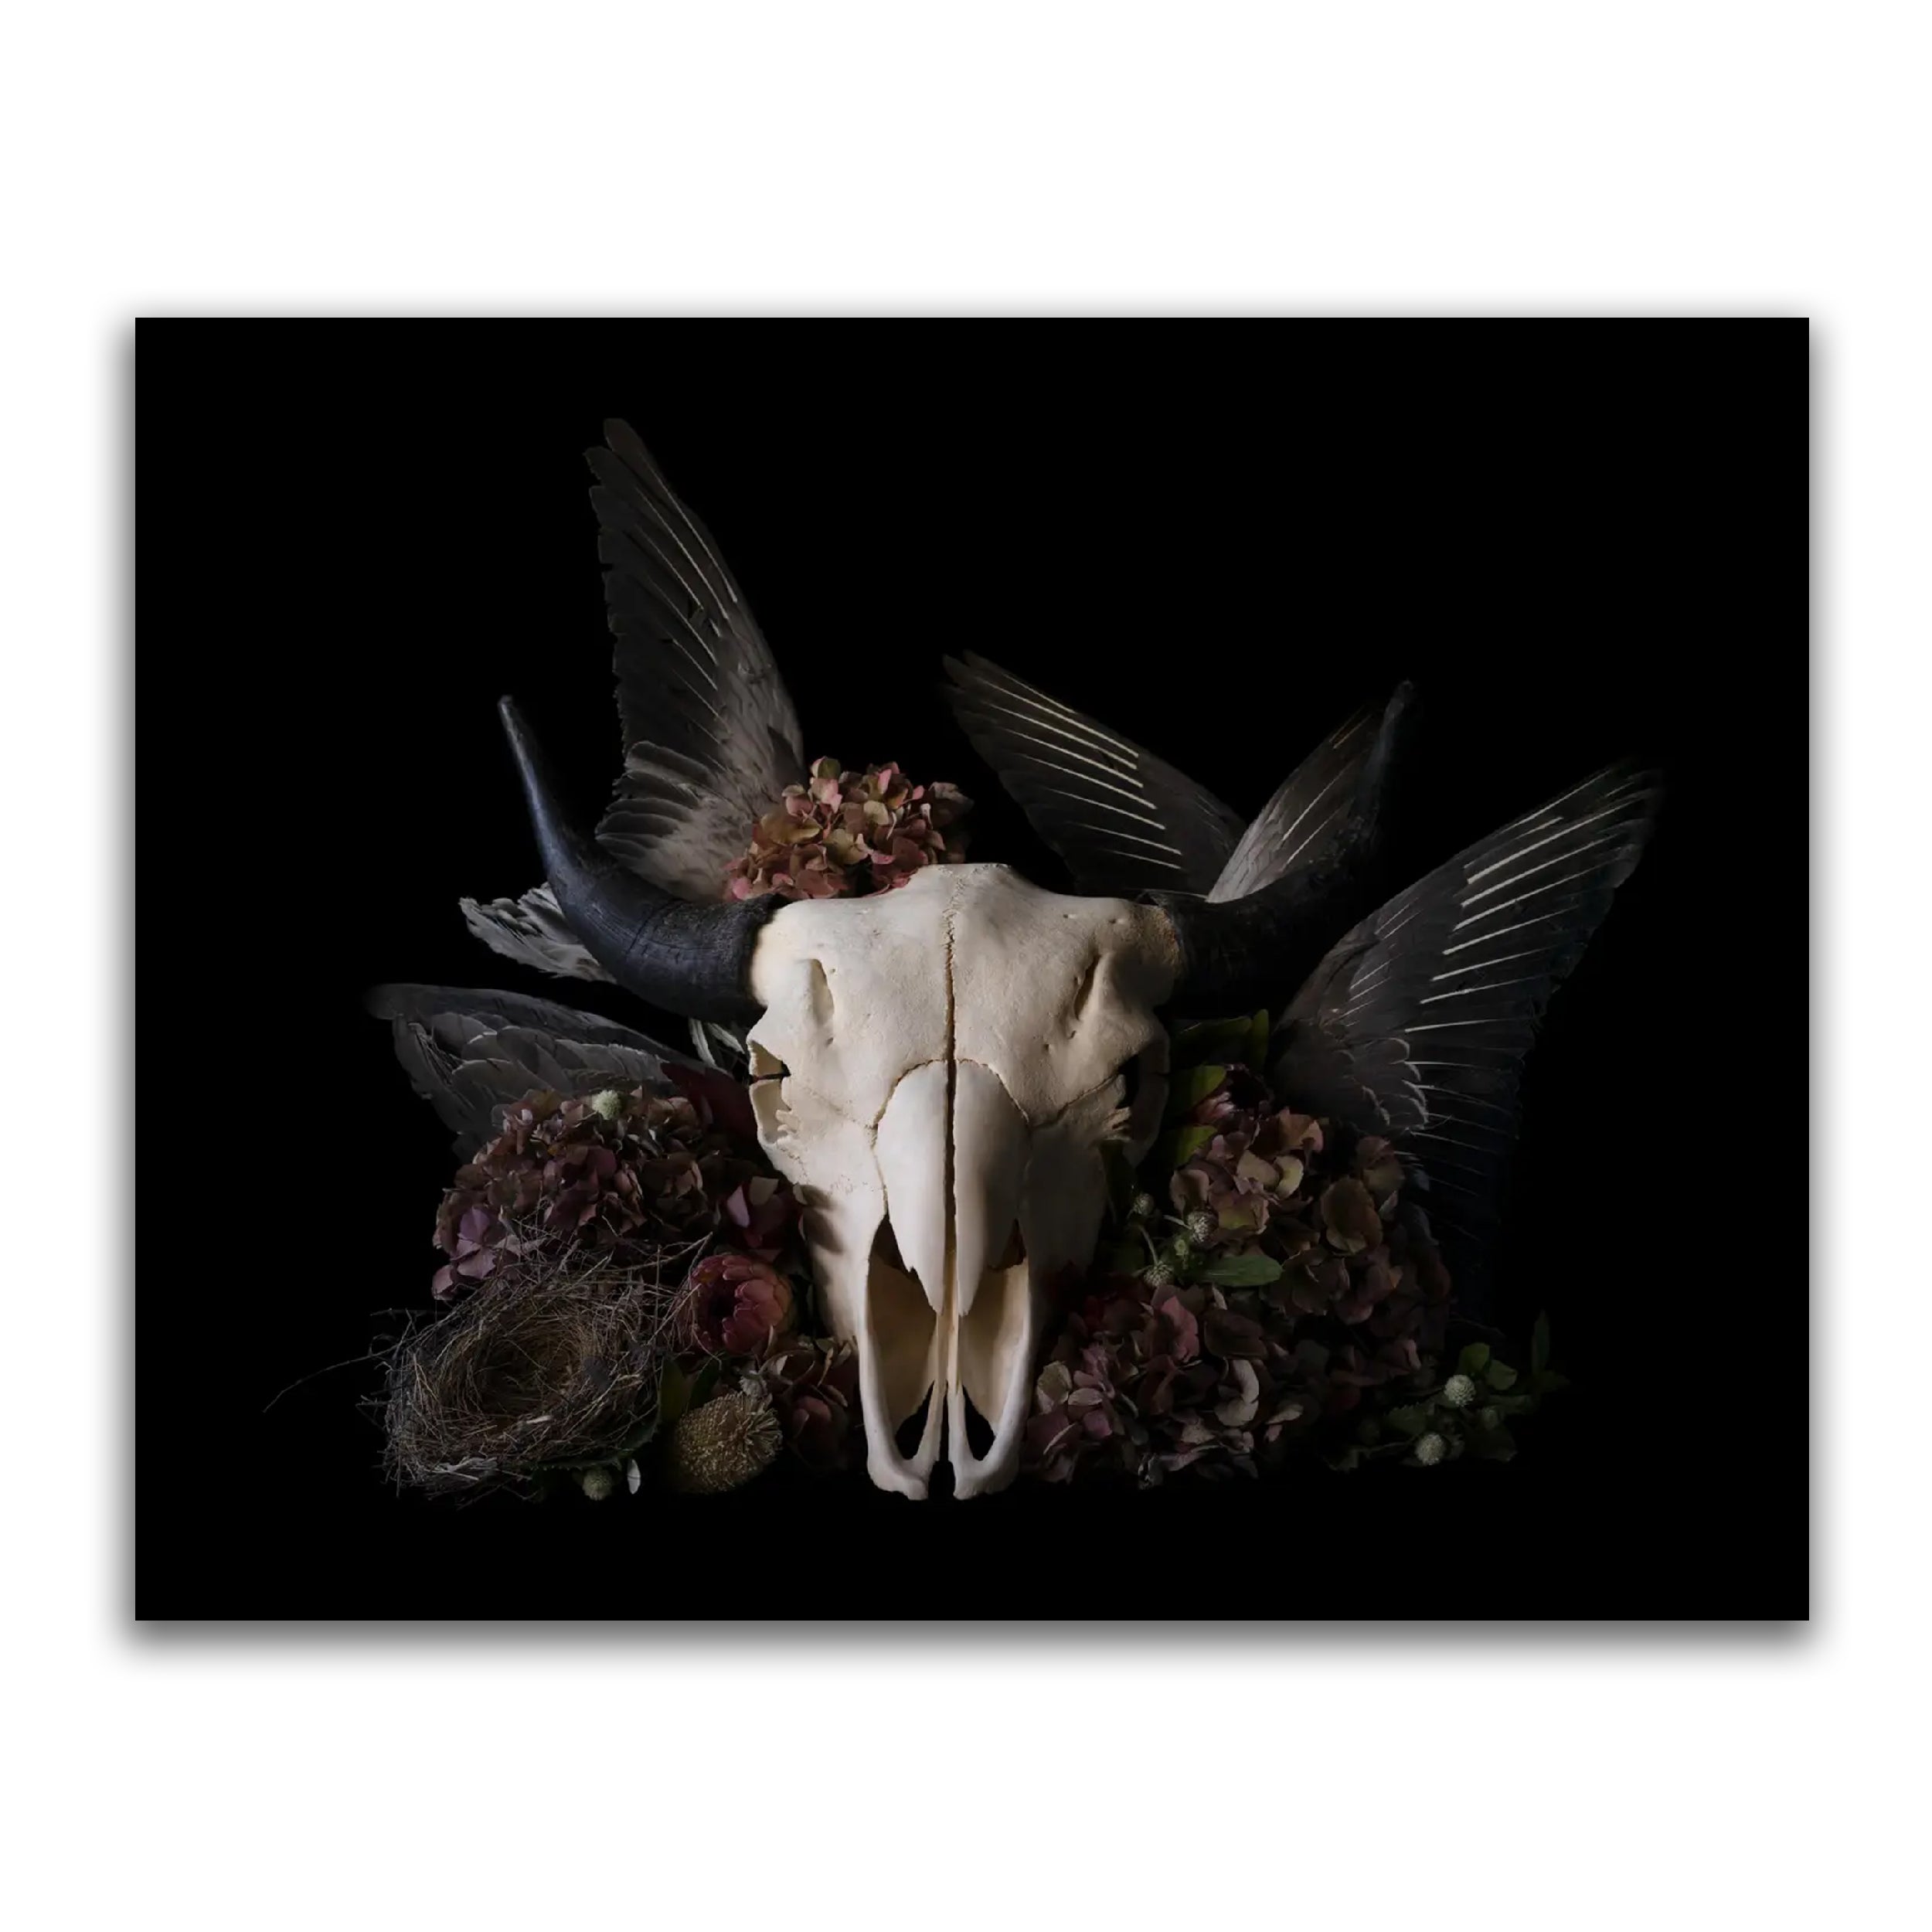 Untitled - 72 - Limited Edition fine art photography print - The Blackened Teeth 